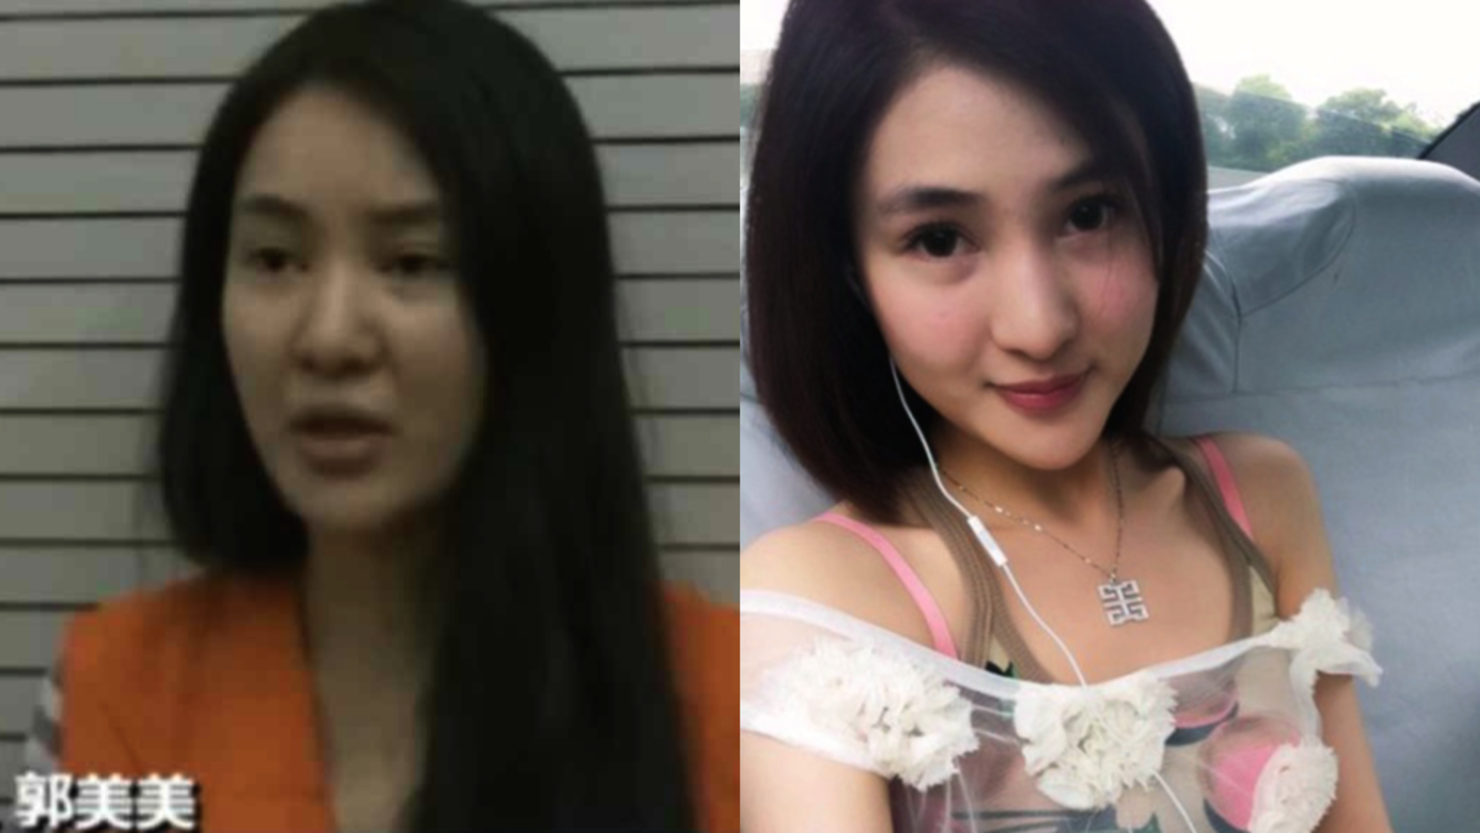 Chinese social media celebrity Guo Meimei, seen here during her televised confession in August 2014 (l) and in one of her many photographs detailing her lavish lifestyle on Weibo, China's version of Twitter (r).